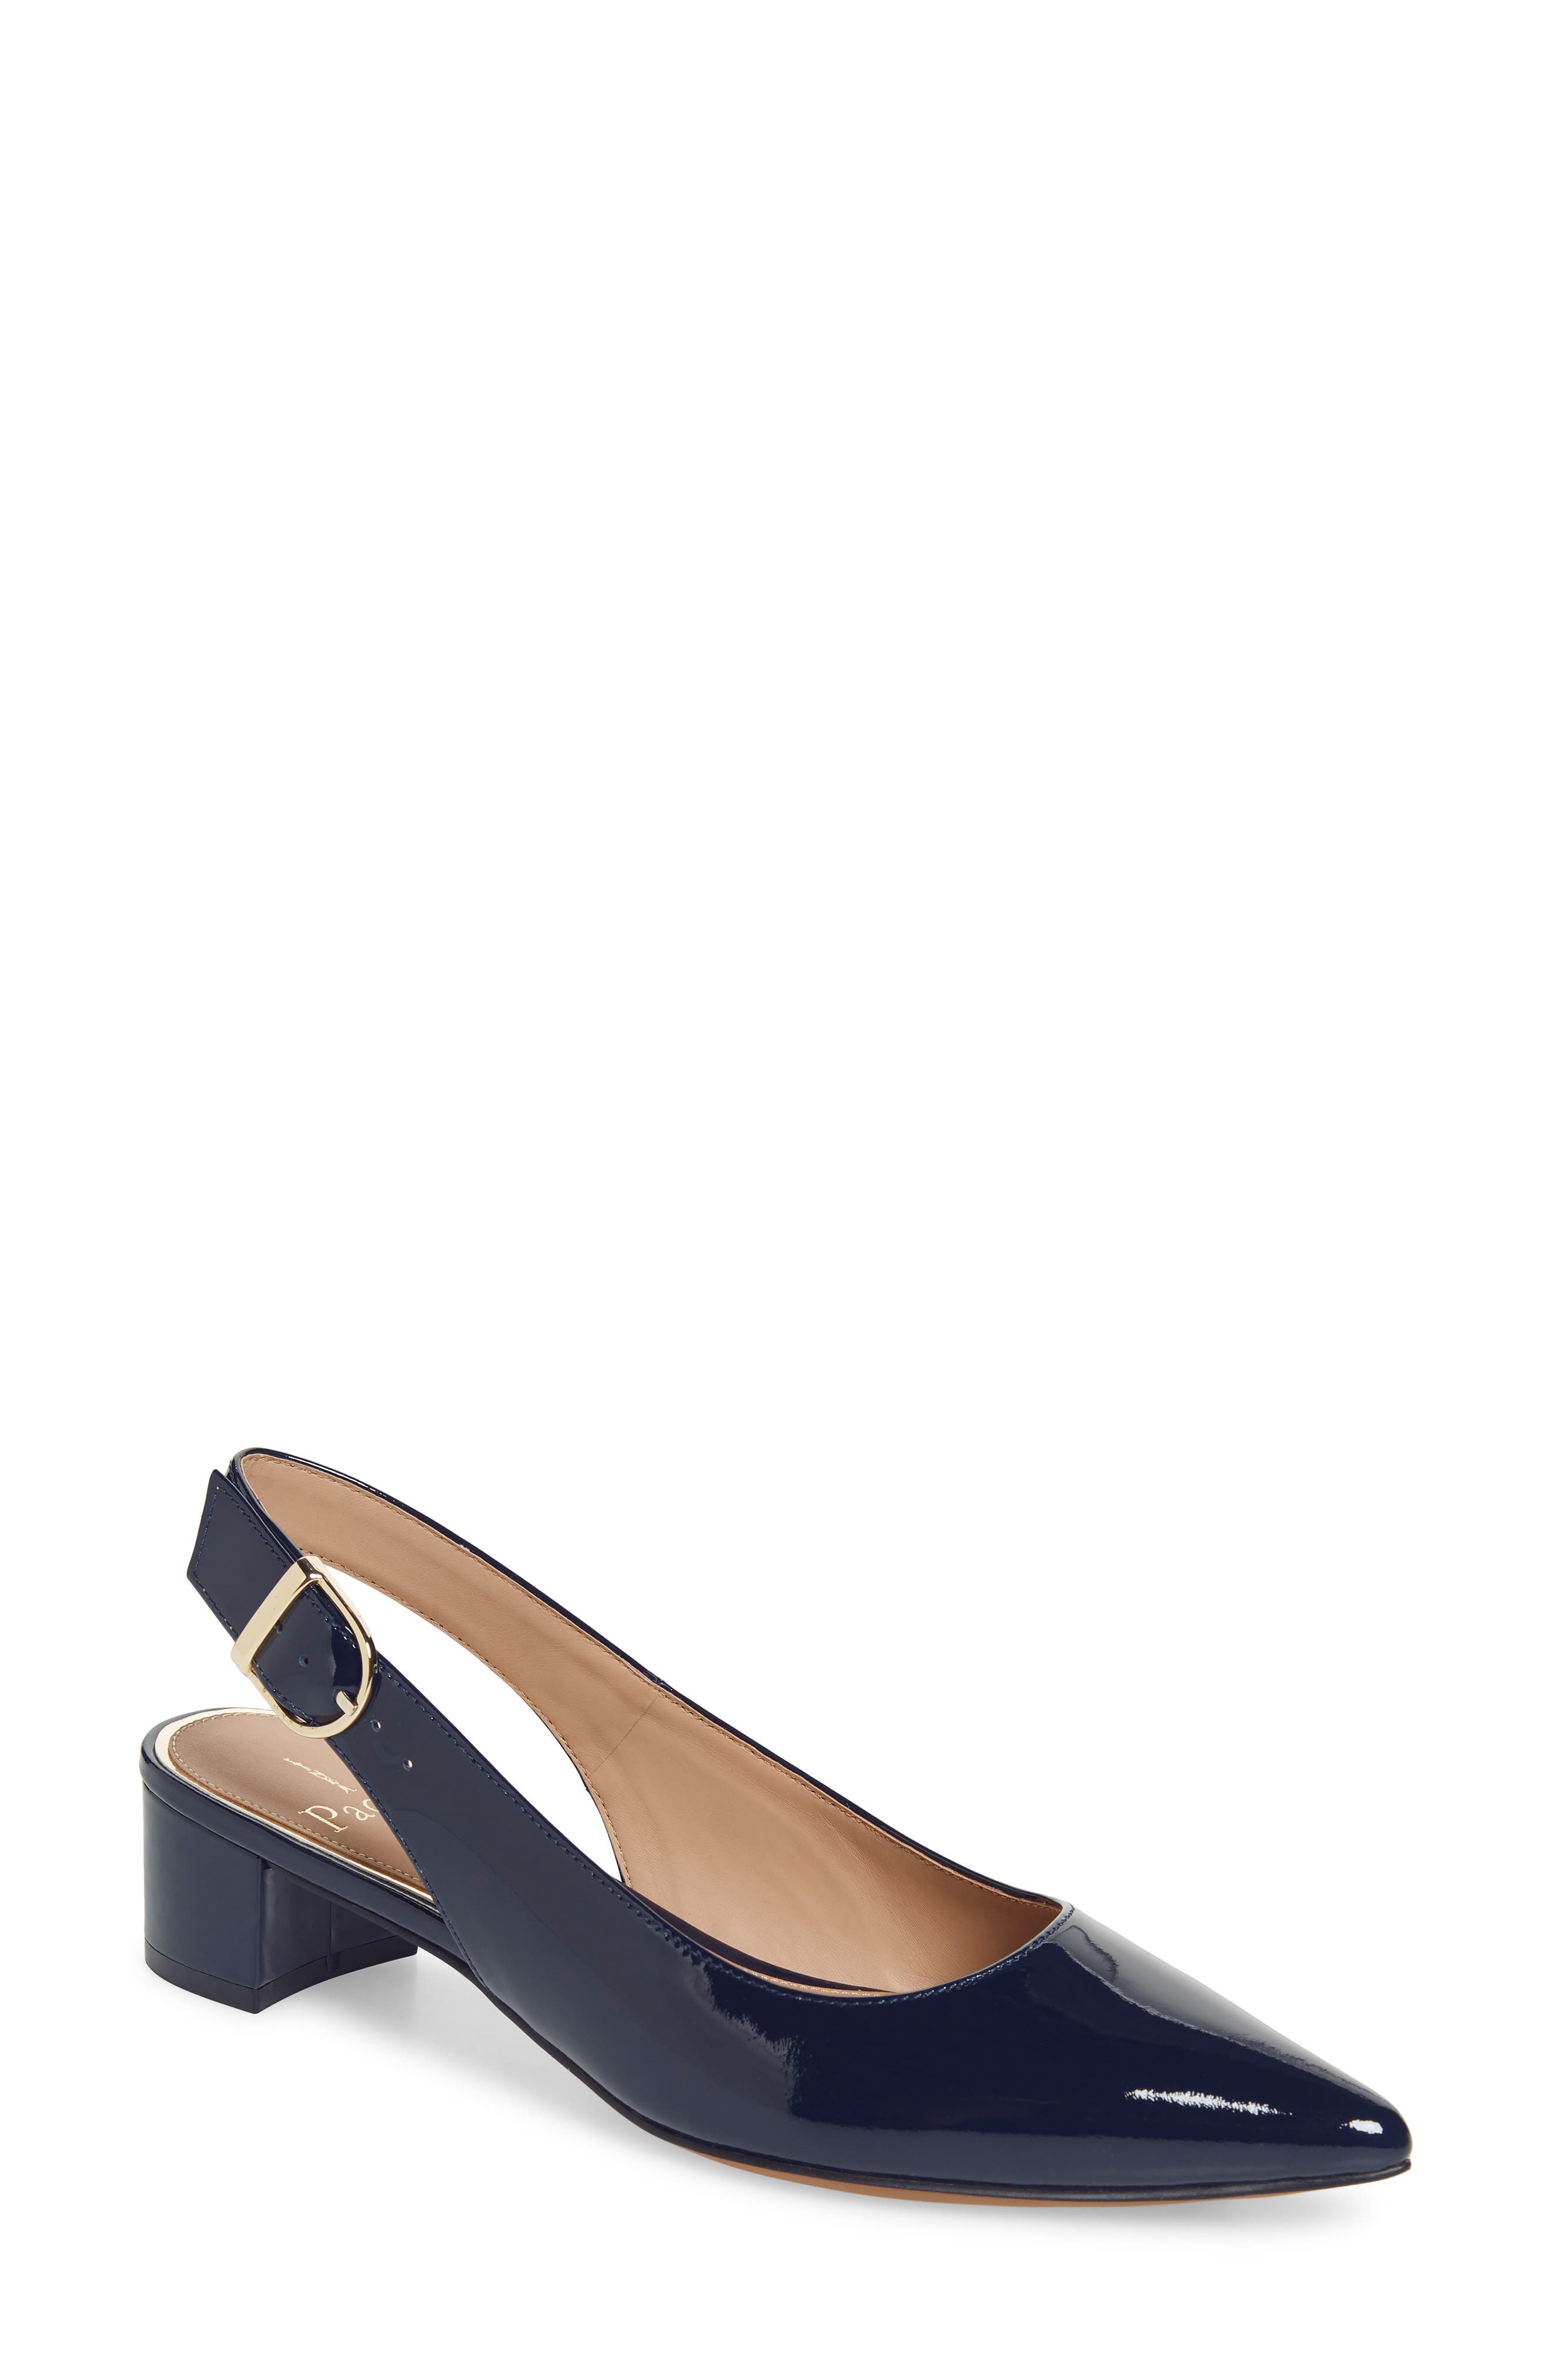 Linea Paolo Cella Slingback Pump in Marine Blue Patent Leather